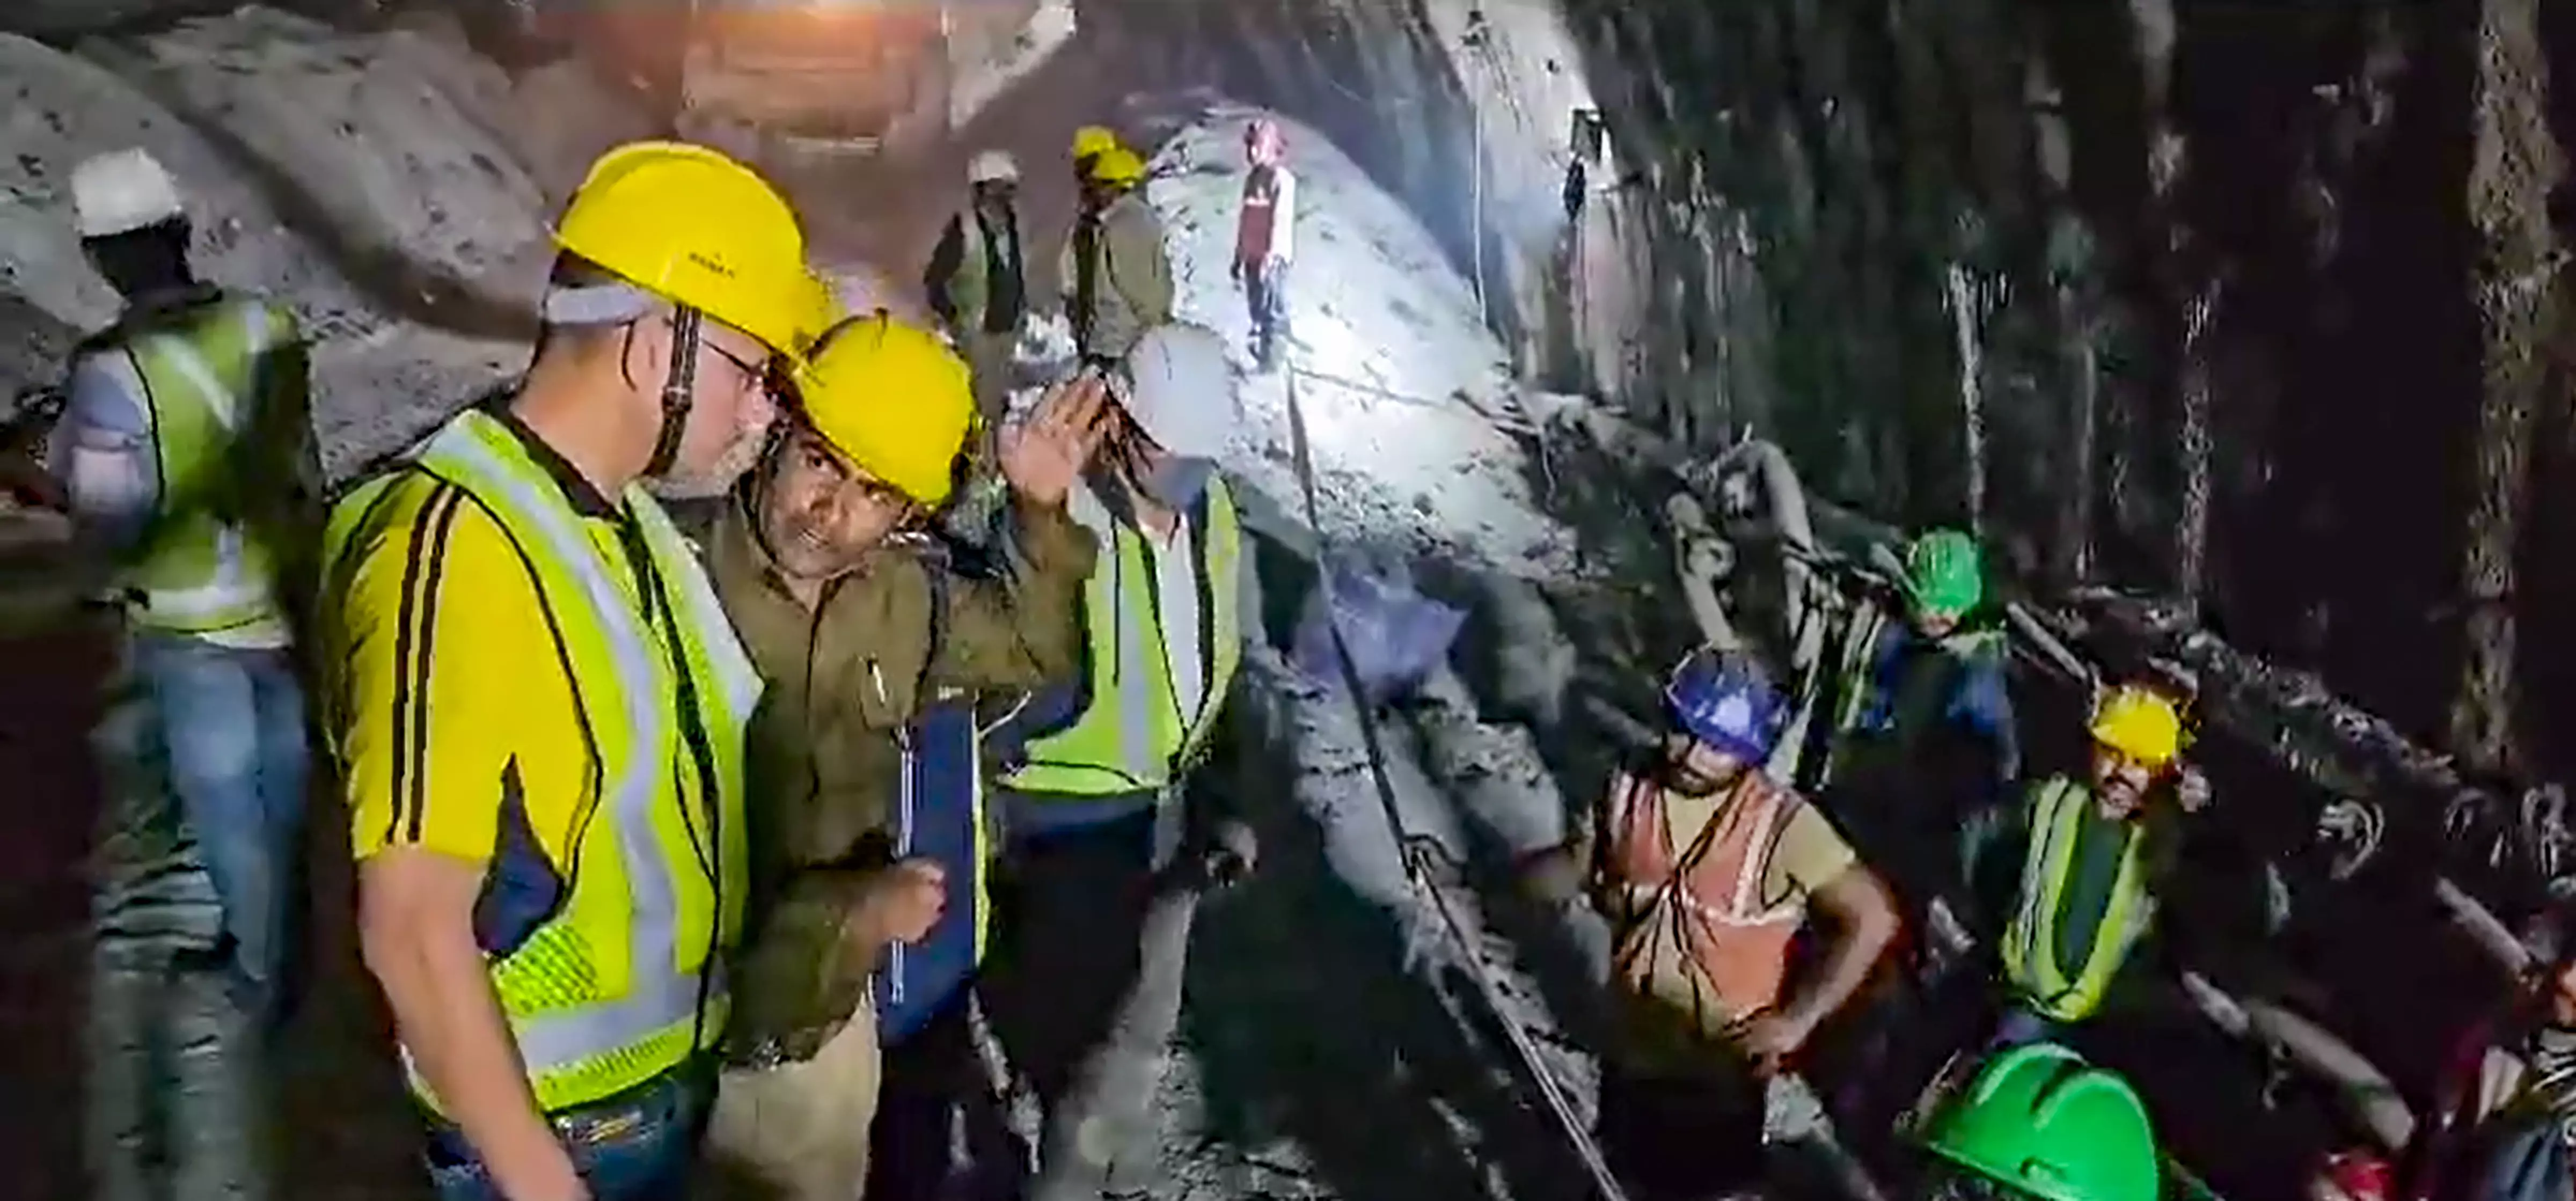 Uttarakhand: Trapped workers to be rescued by wide pipes inserted through rubble